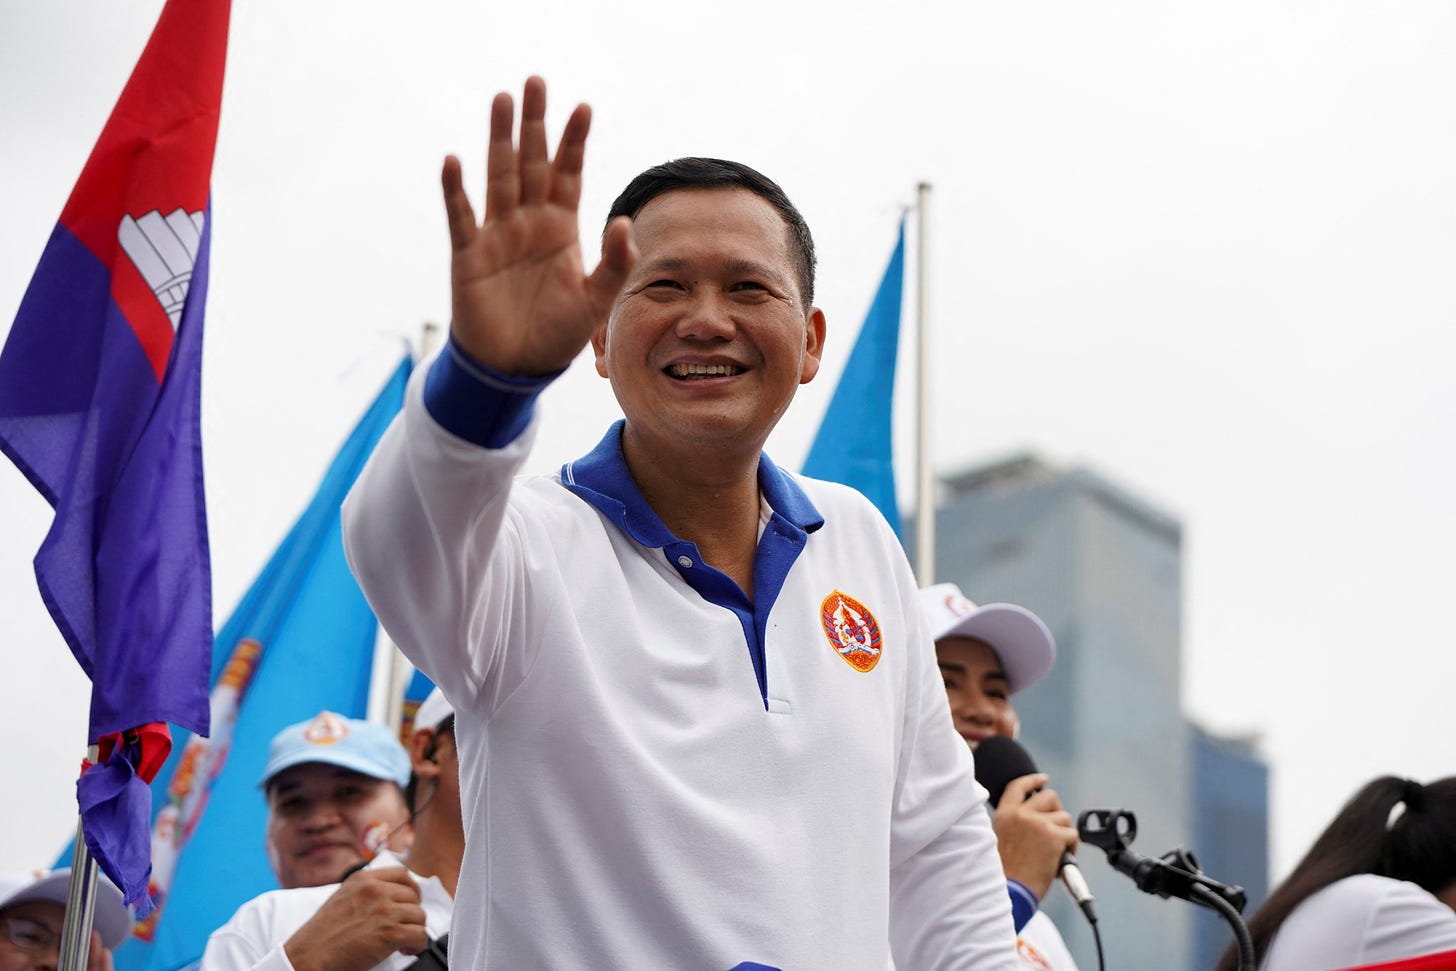 Hun Manet, son of Cambodia's Prime Minister Hun Sen, attends the final Cambodian People's Party (CPP) election campaign for the upcoming general election in Phnom Penh